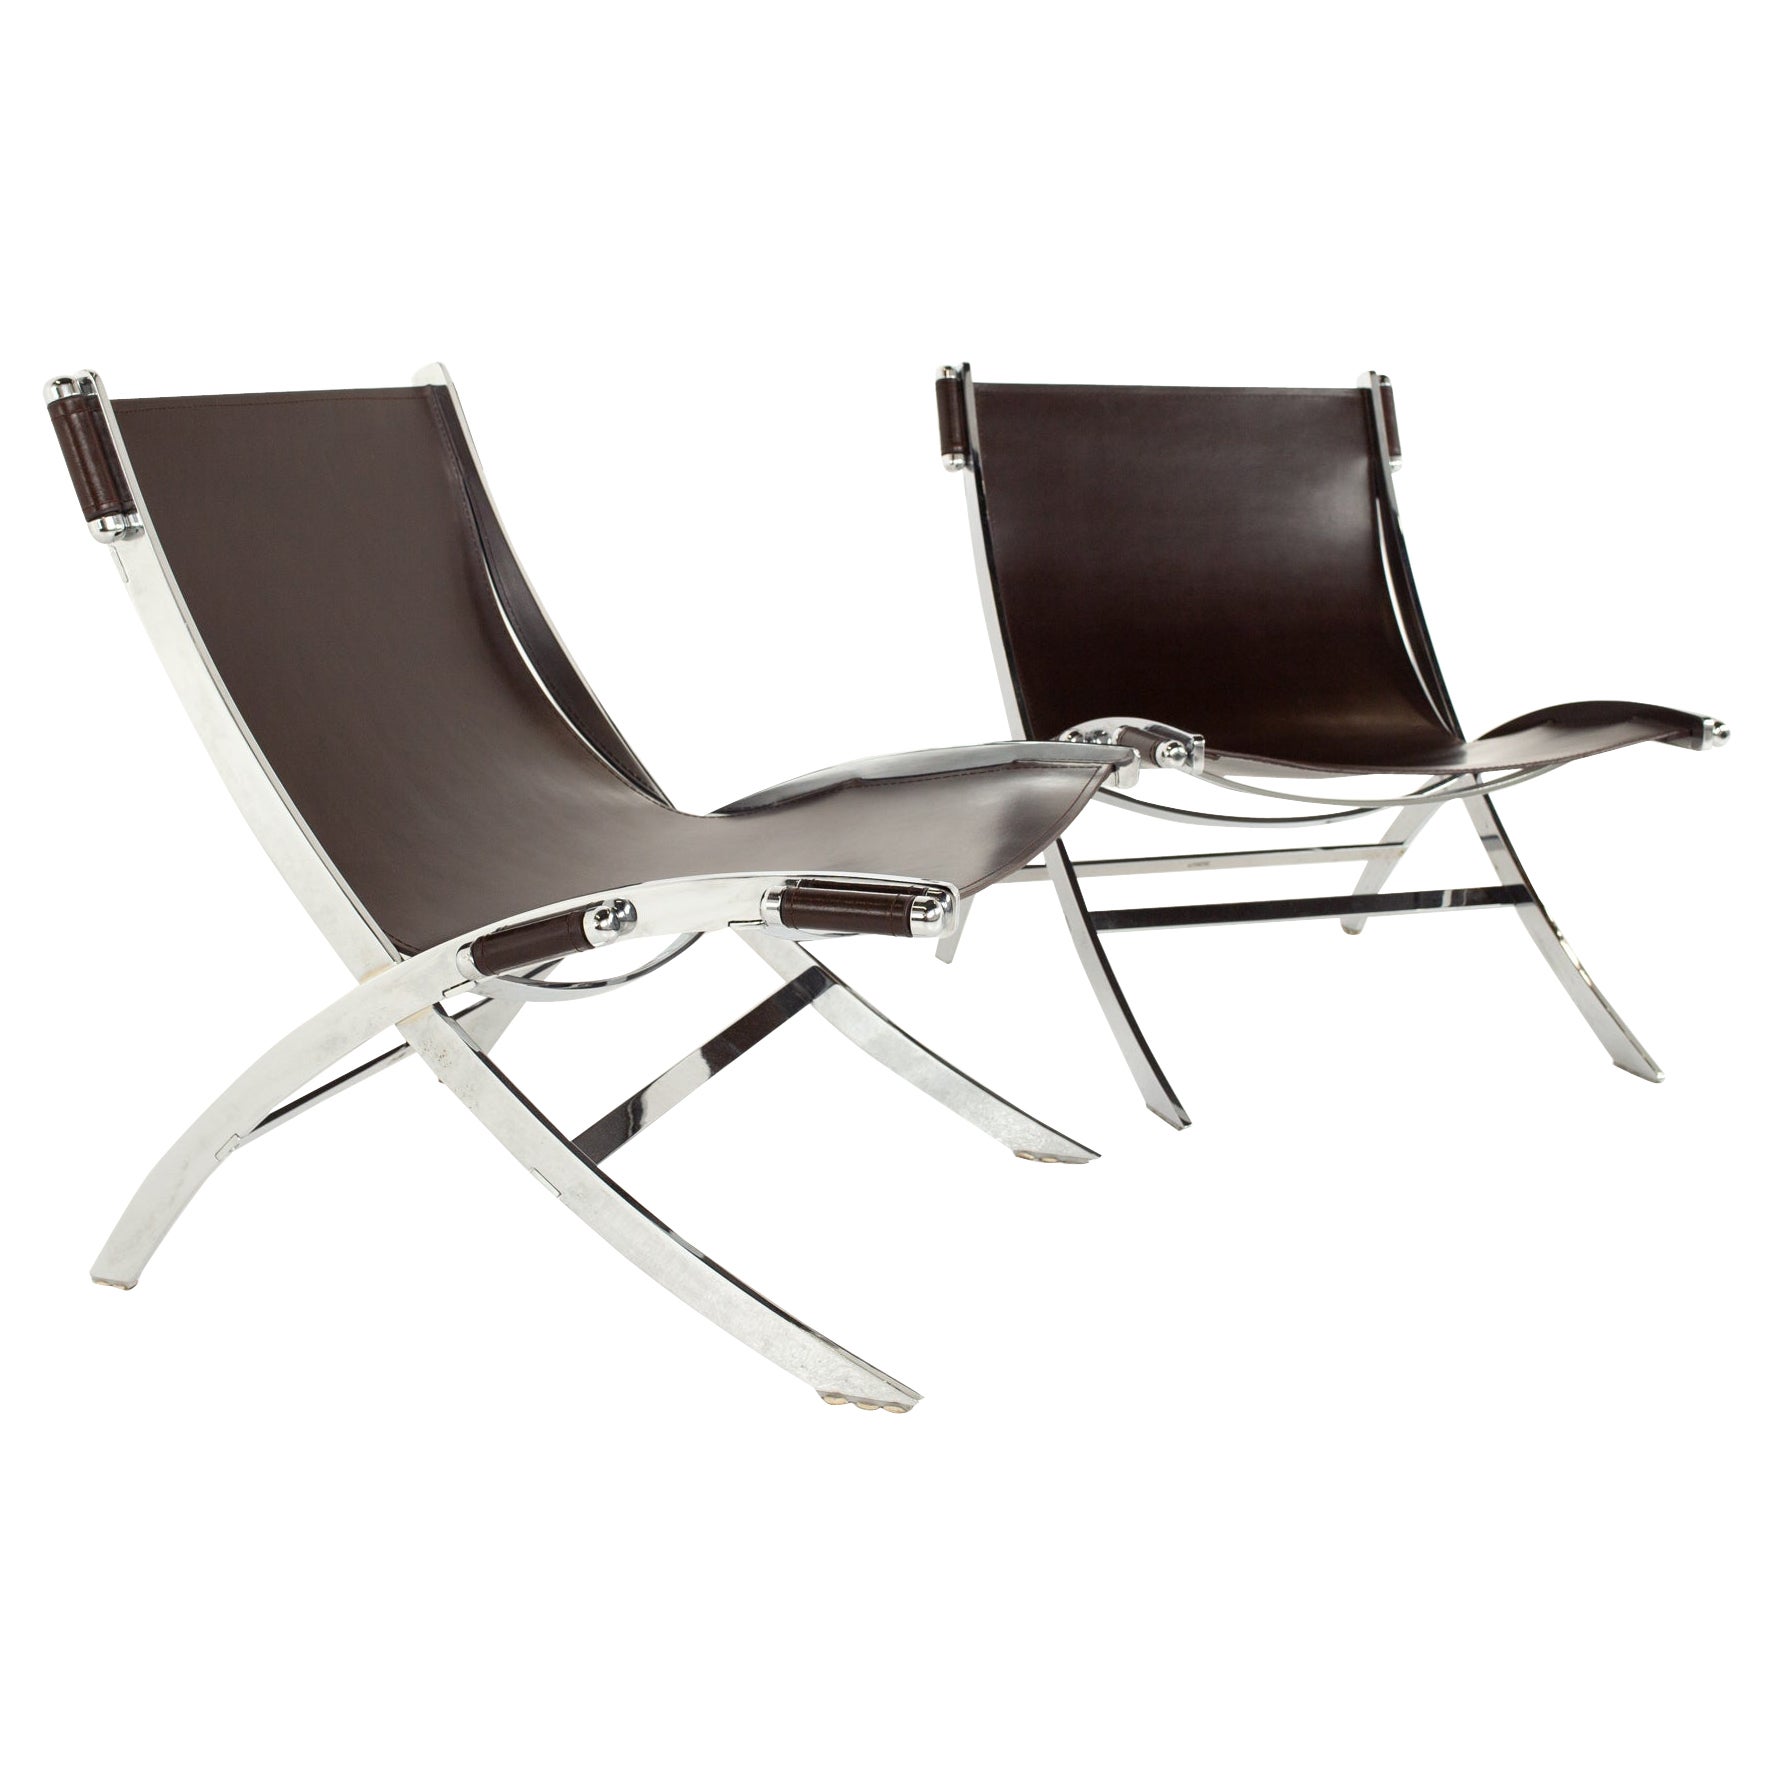 Paul Tuttle for Flexform Style MCM Brown Leather and Chrome Lounge Chair, Pair